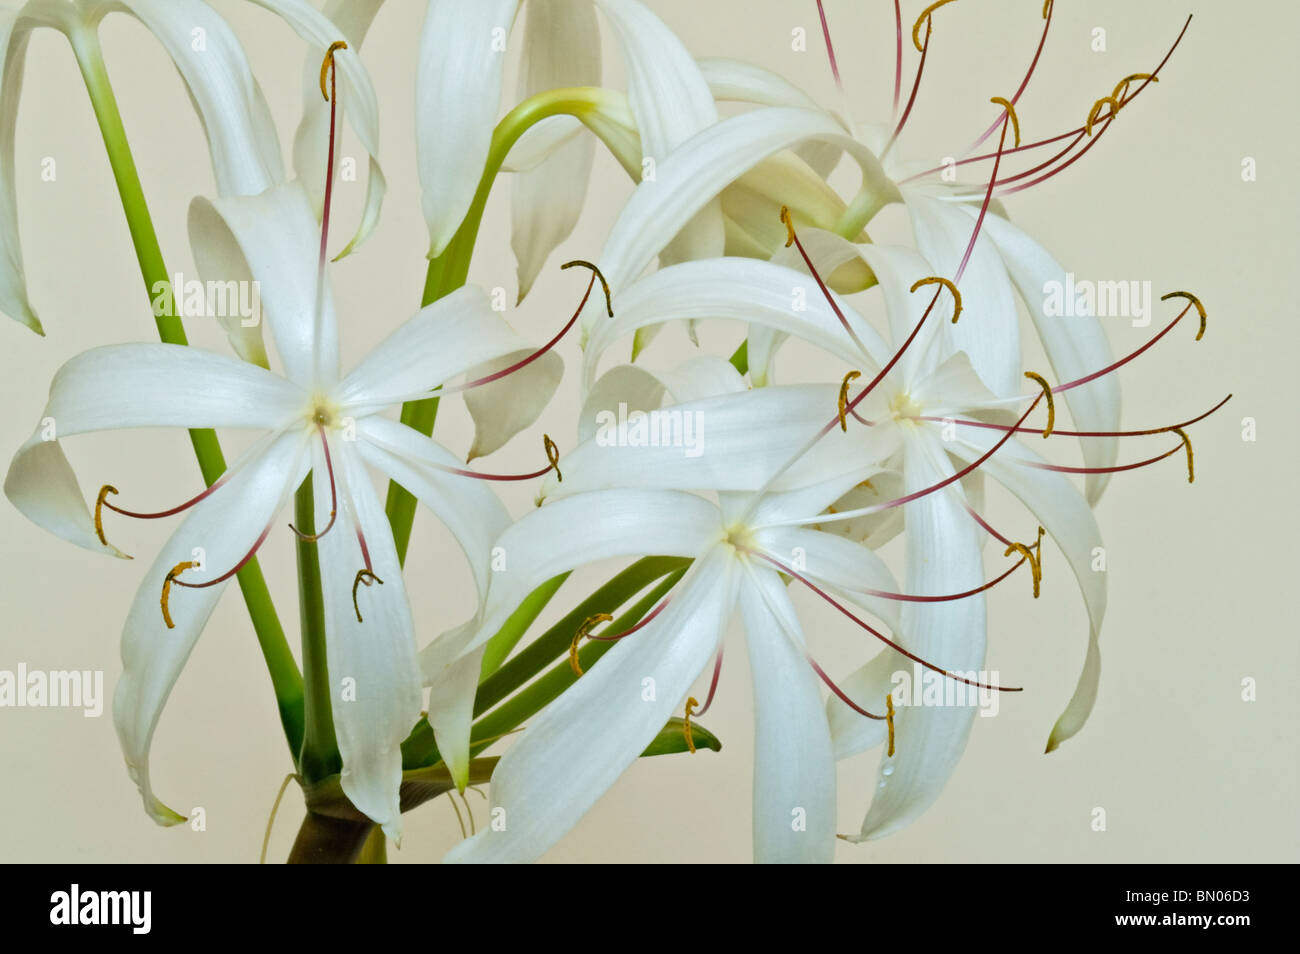 Swamp Lily (Crinum pedunculatum). Called River lily, Mangrove lily and Spider lily also Stock Photo